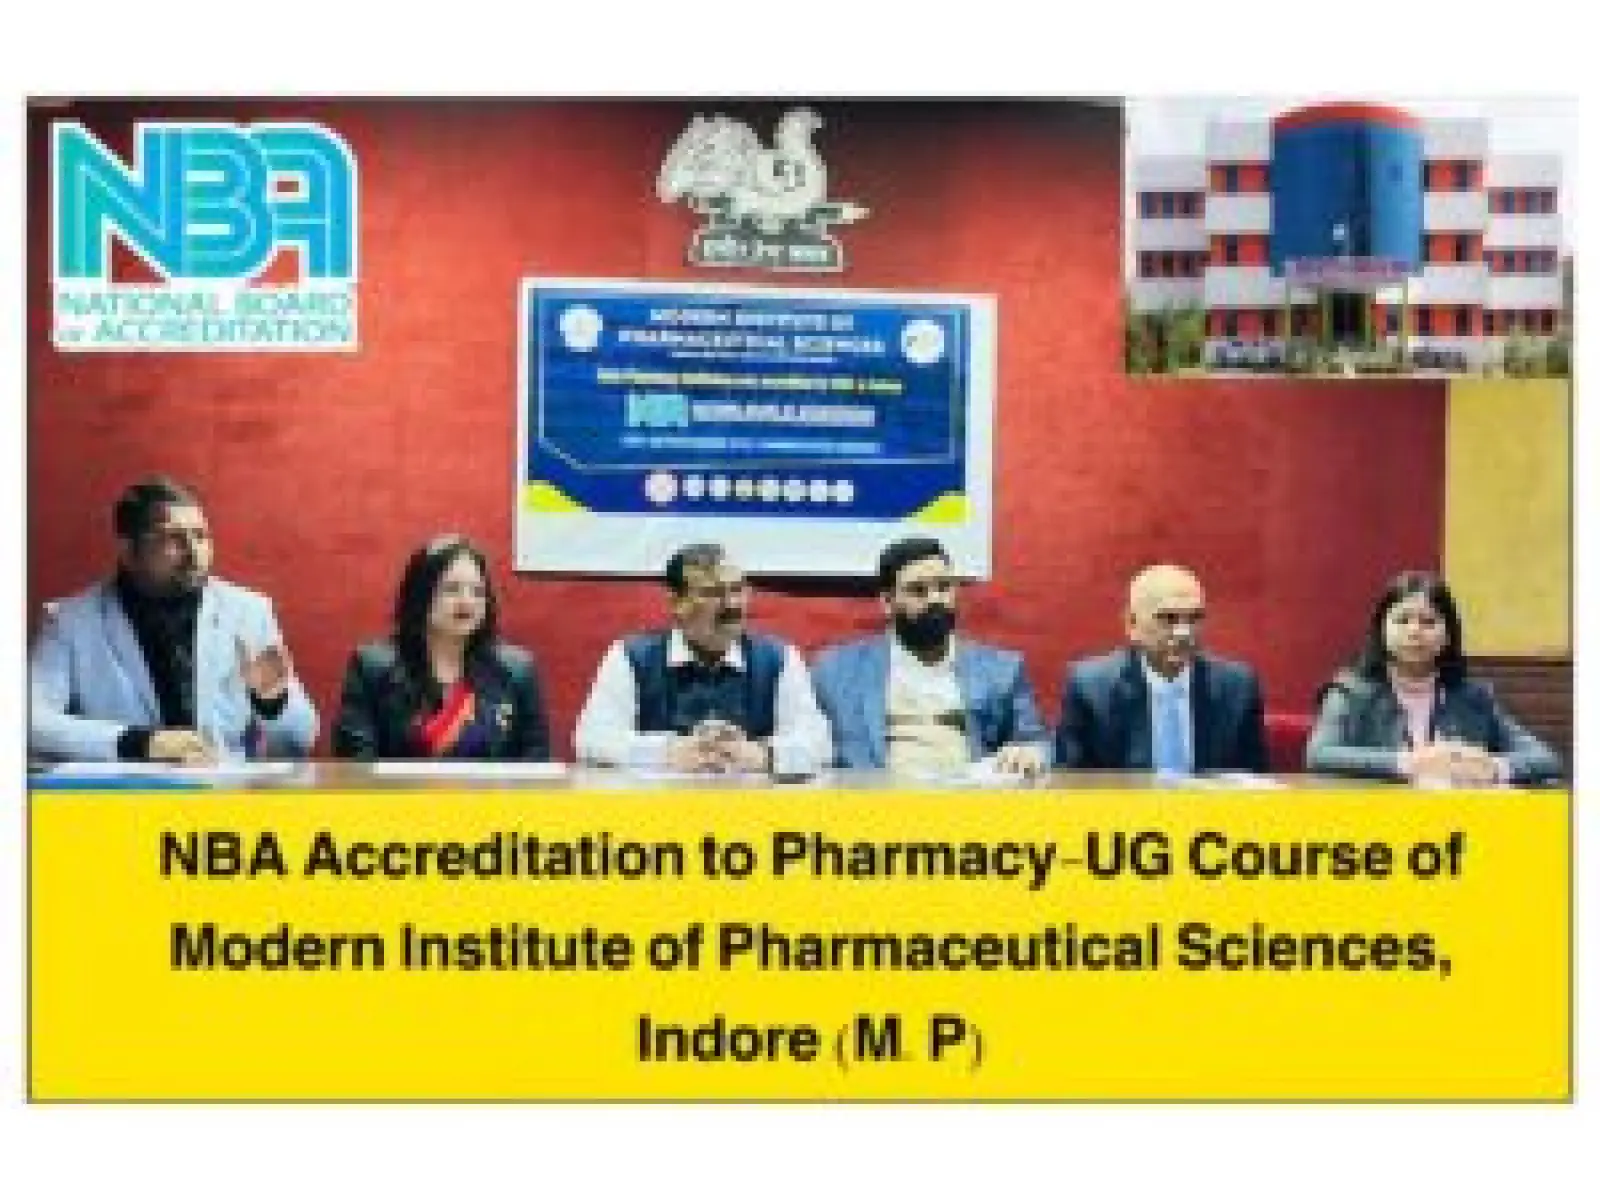 NBA Accreditation Award to Modern Institute of Pharmaceutical Sciences Indore